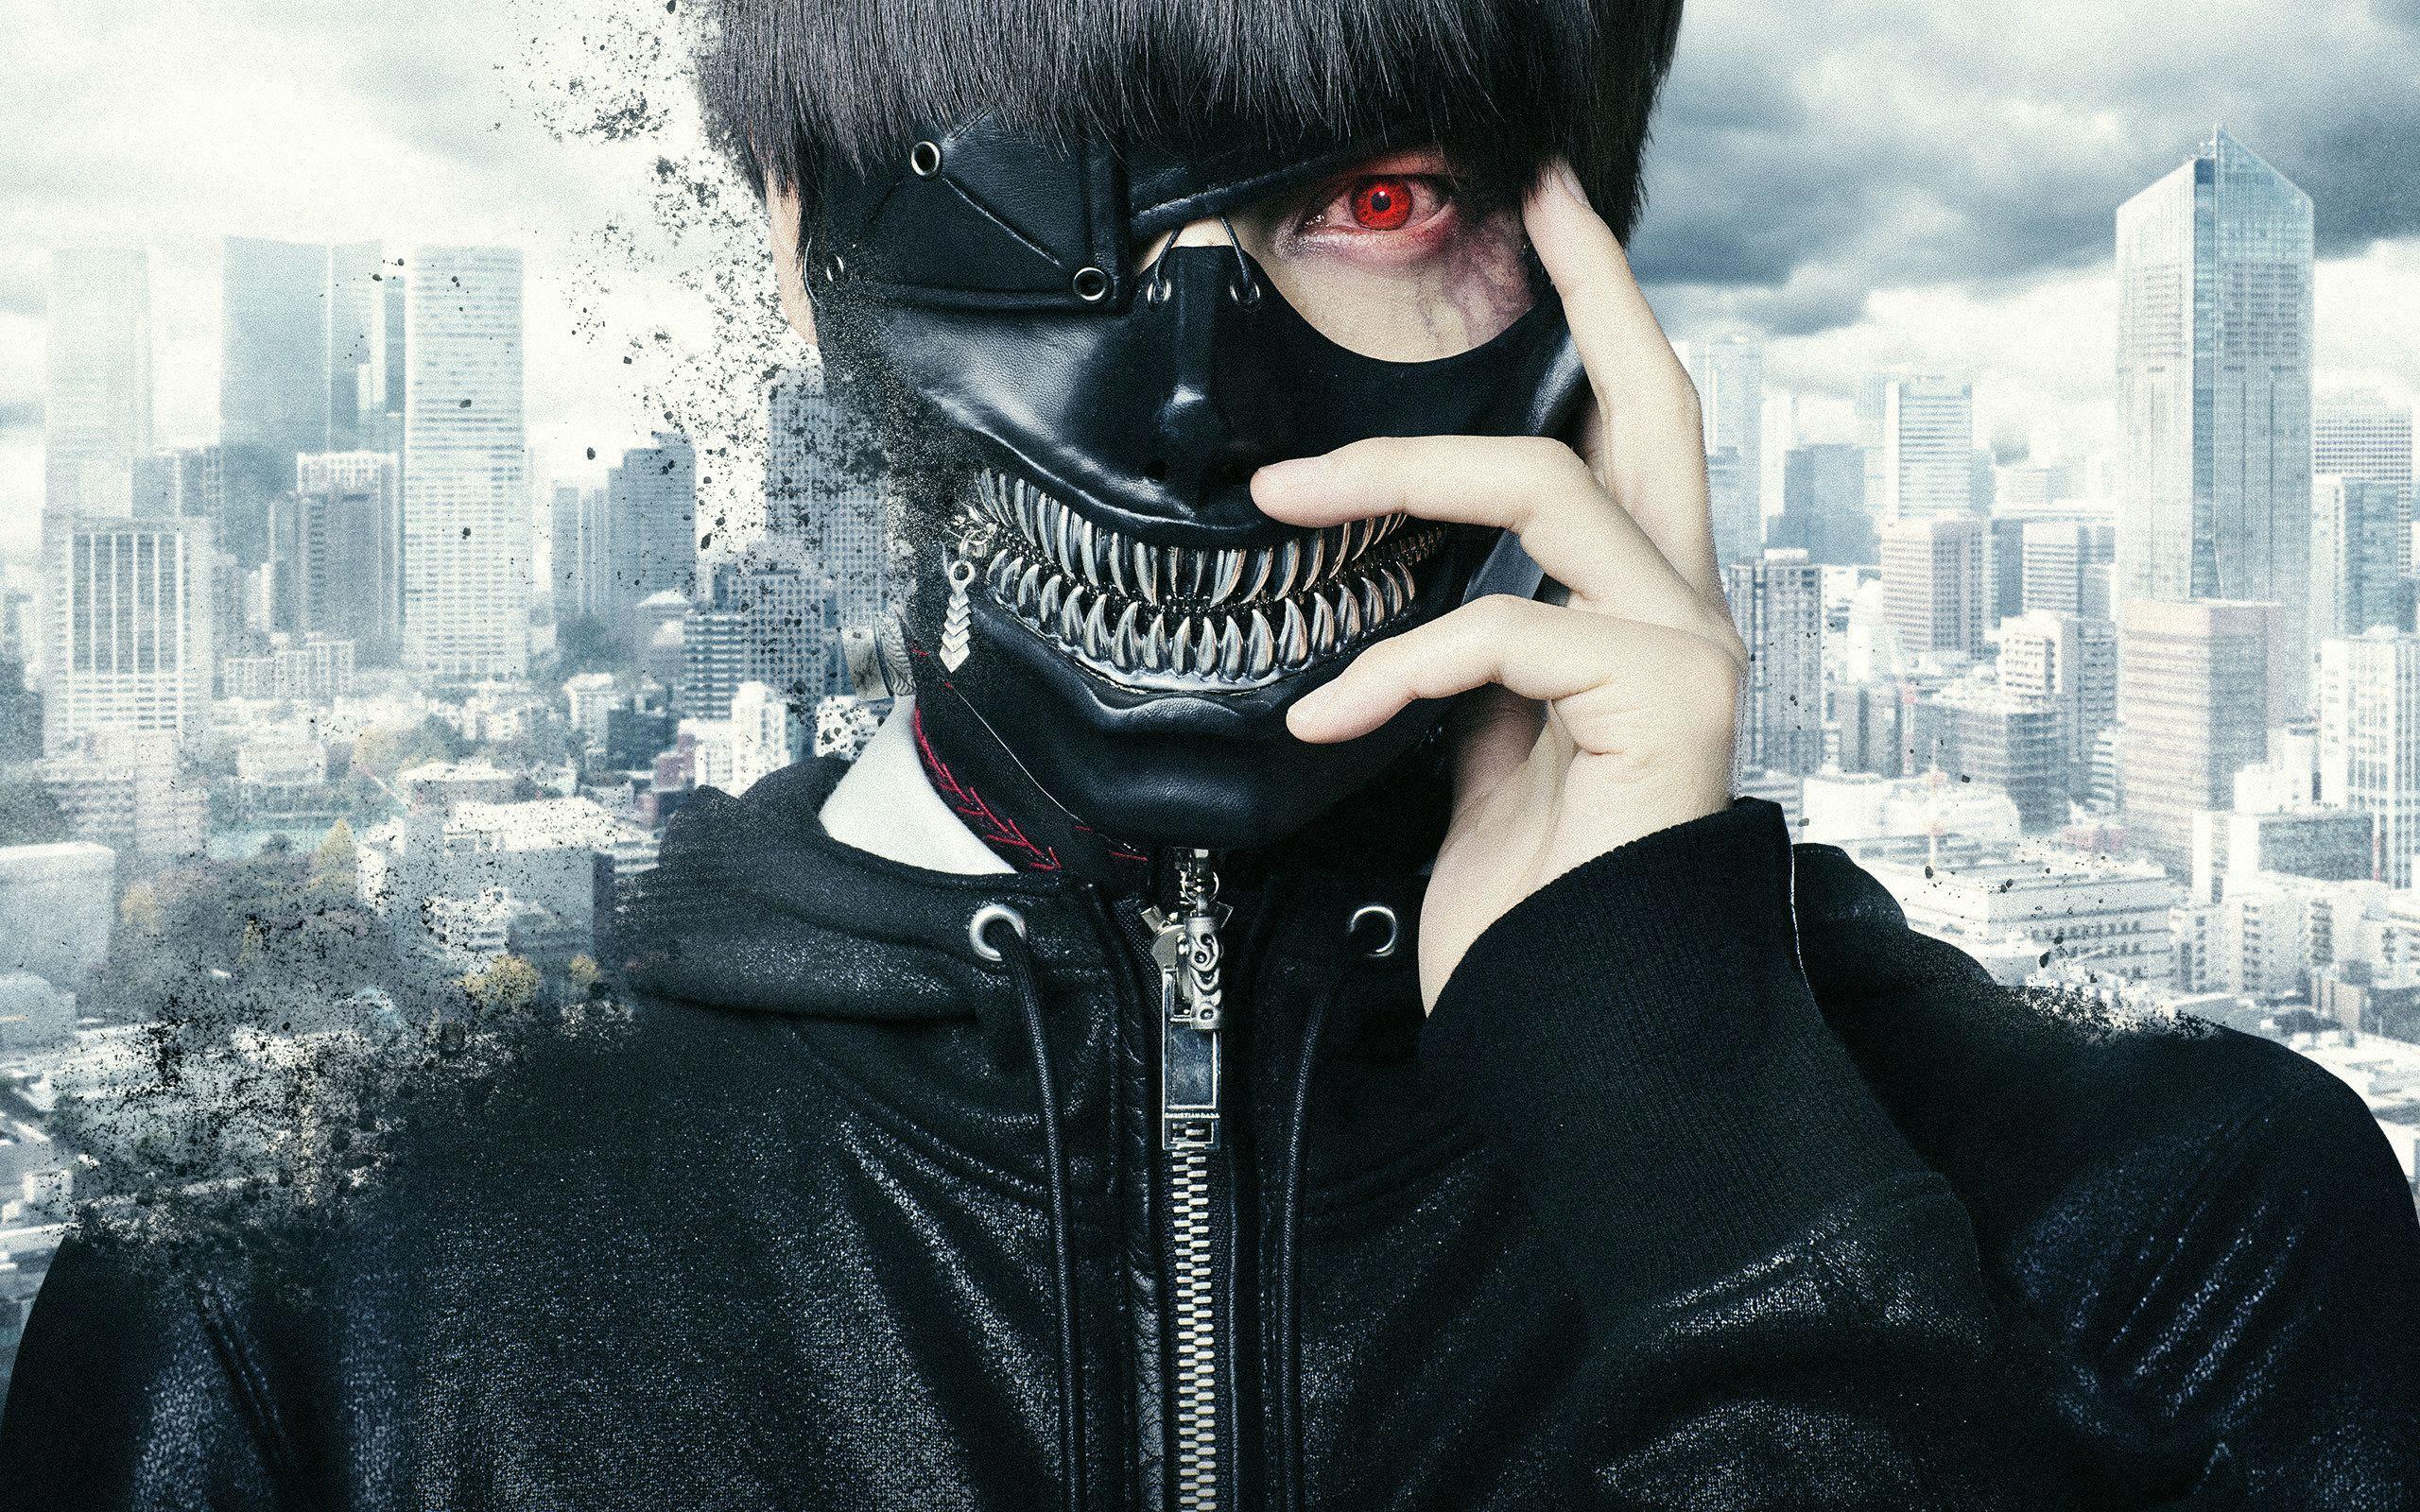  Tokyo  Ghoul  Live  Wallpapers  Top Free Tokyo  Ghoul  Live  